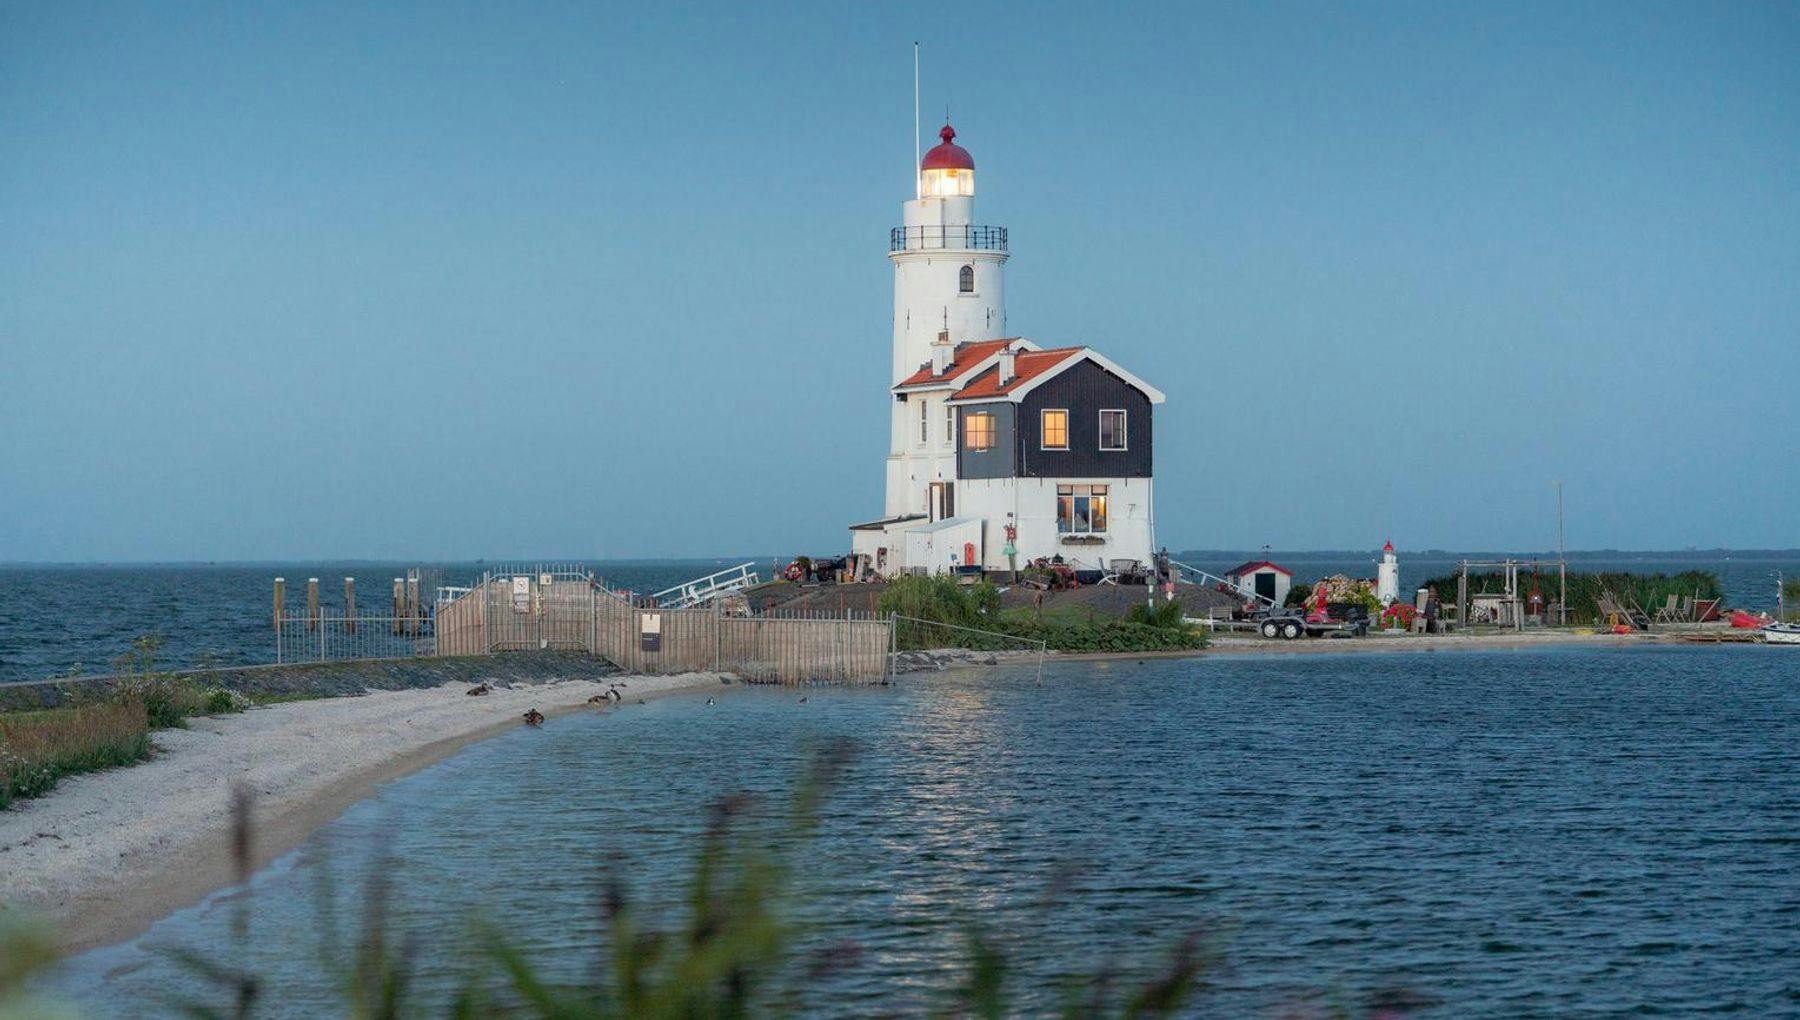 The lighthouse on the island of Marken.